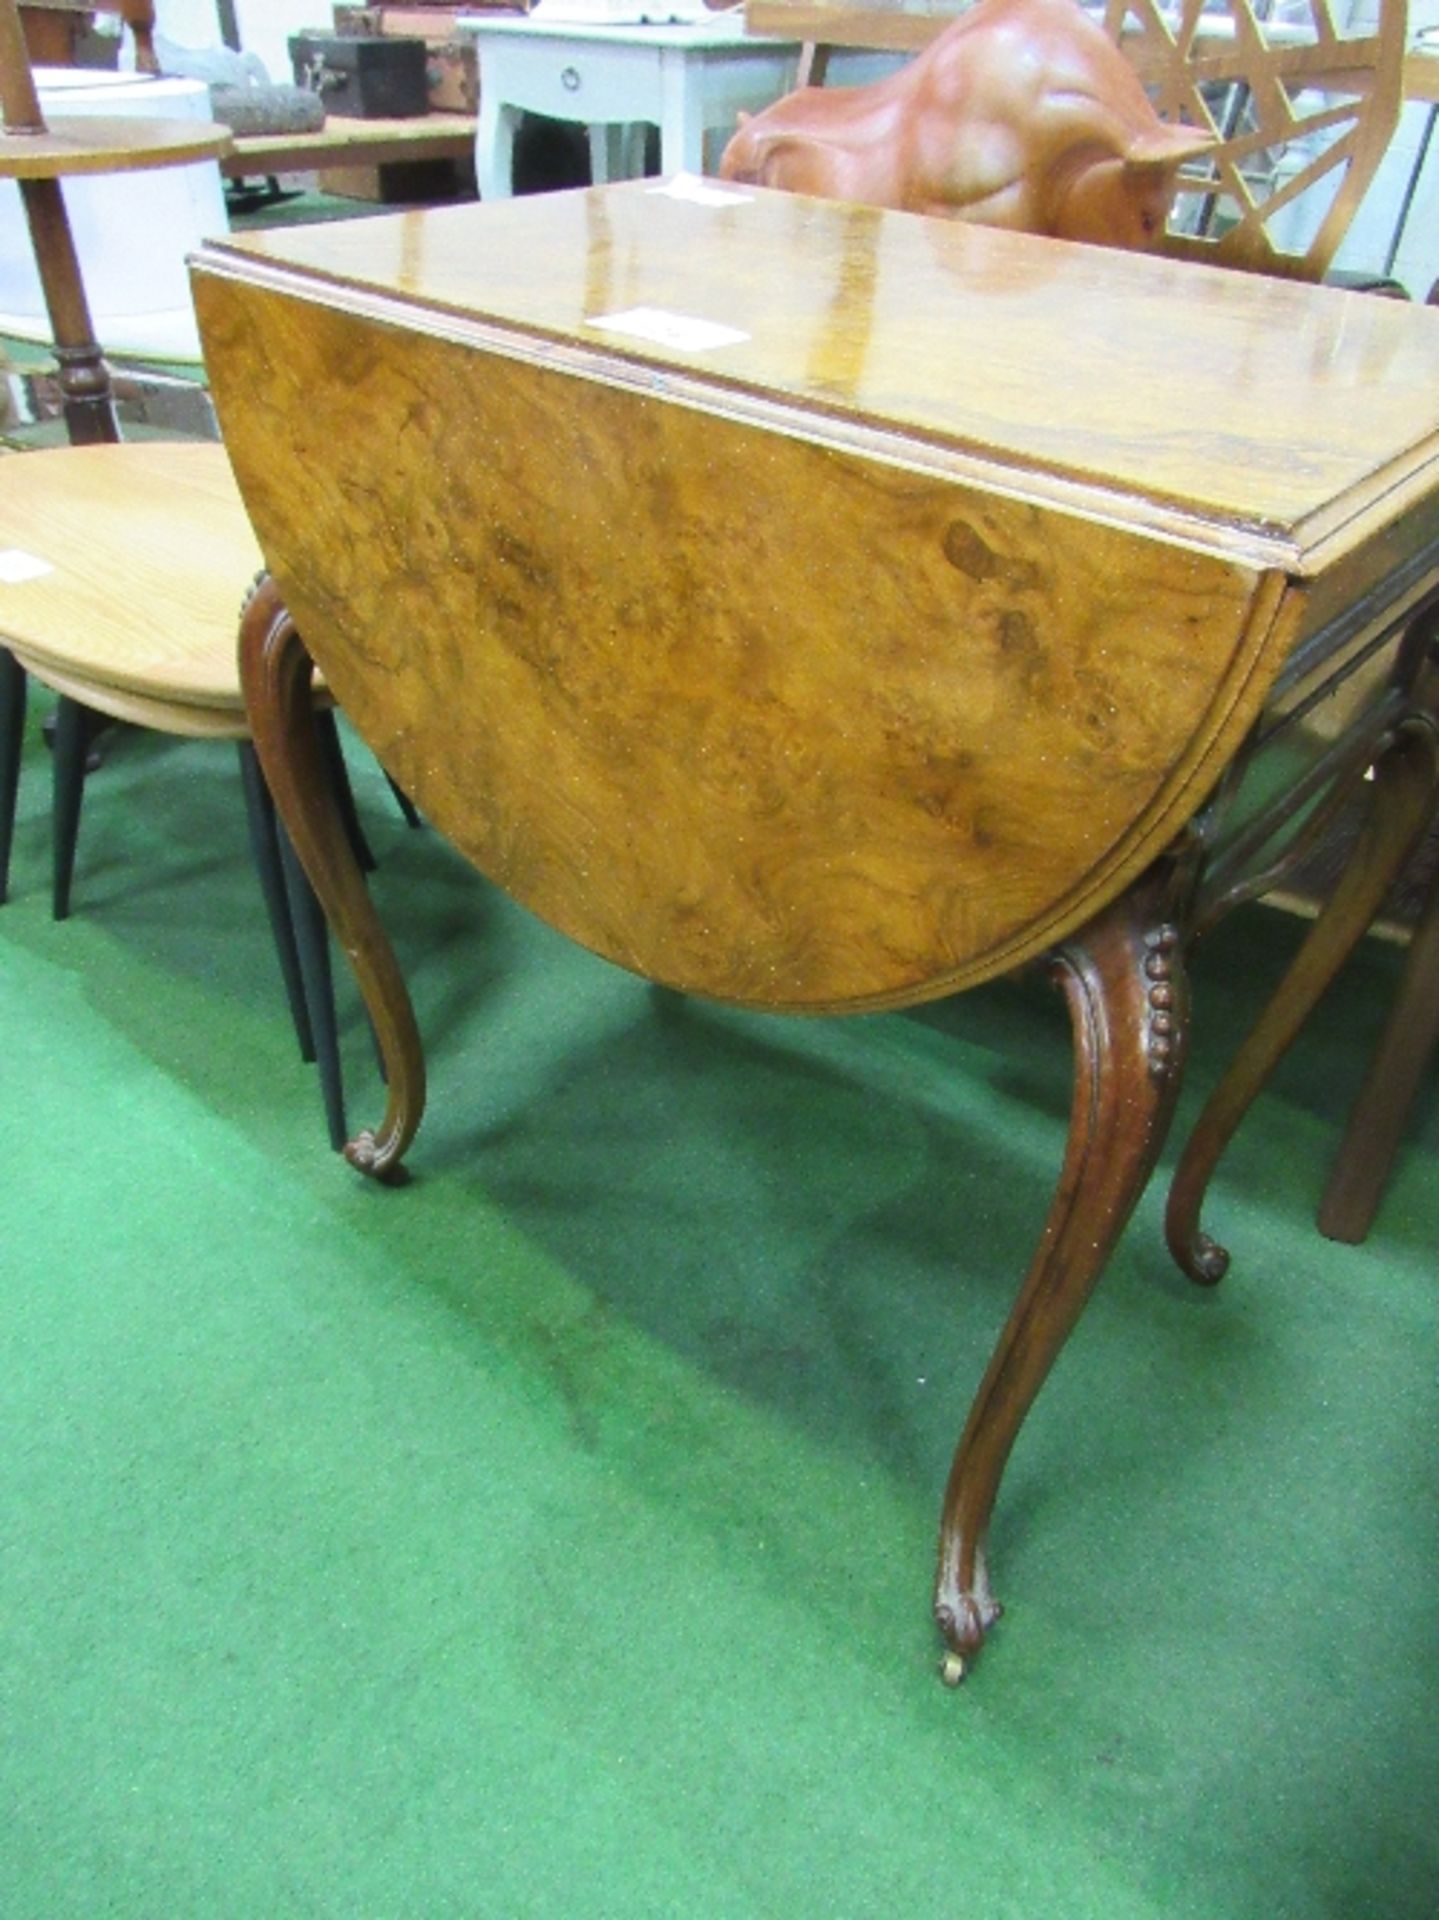 Antique walnut work table with drop sides & 3 drawers to end, on cabriole legs (one of which needs - Image 2 of 3